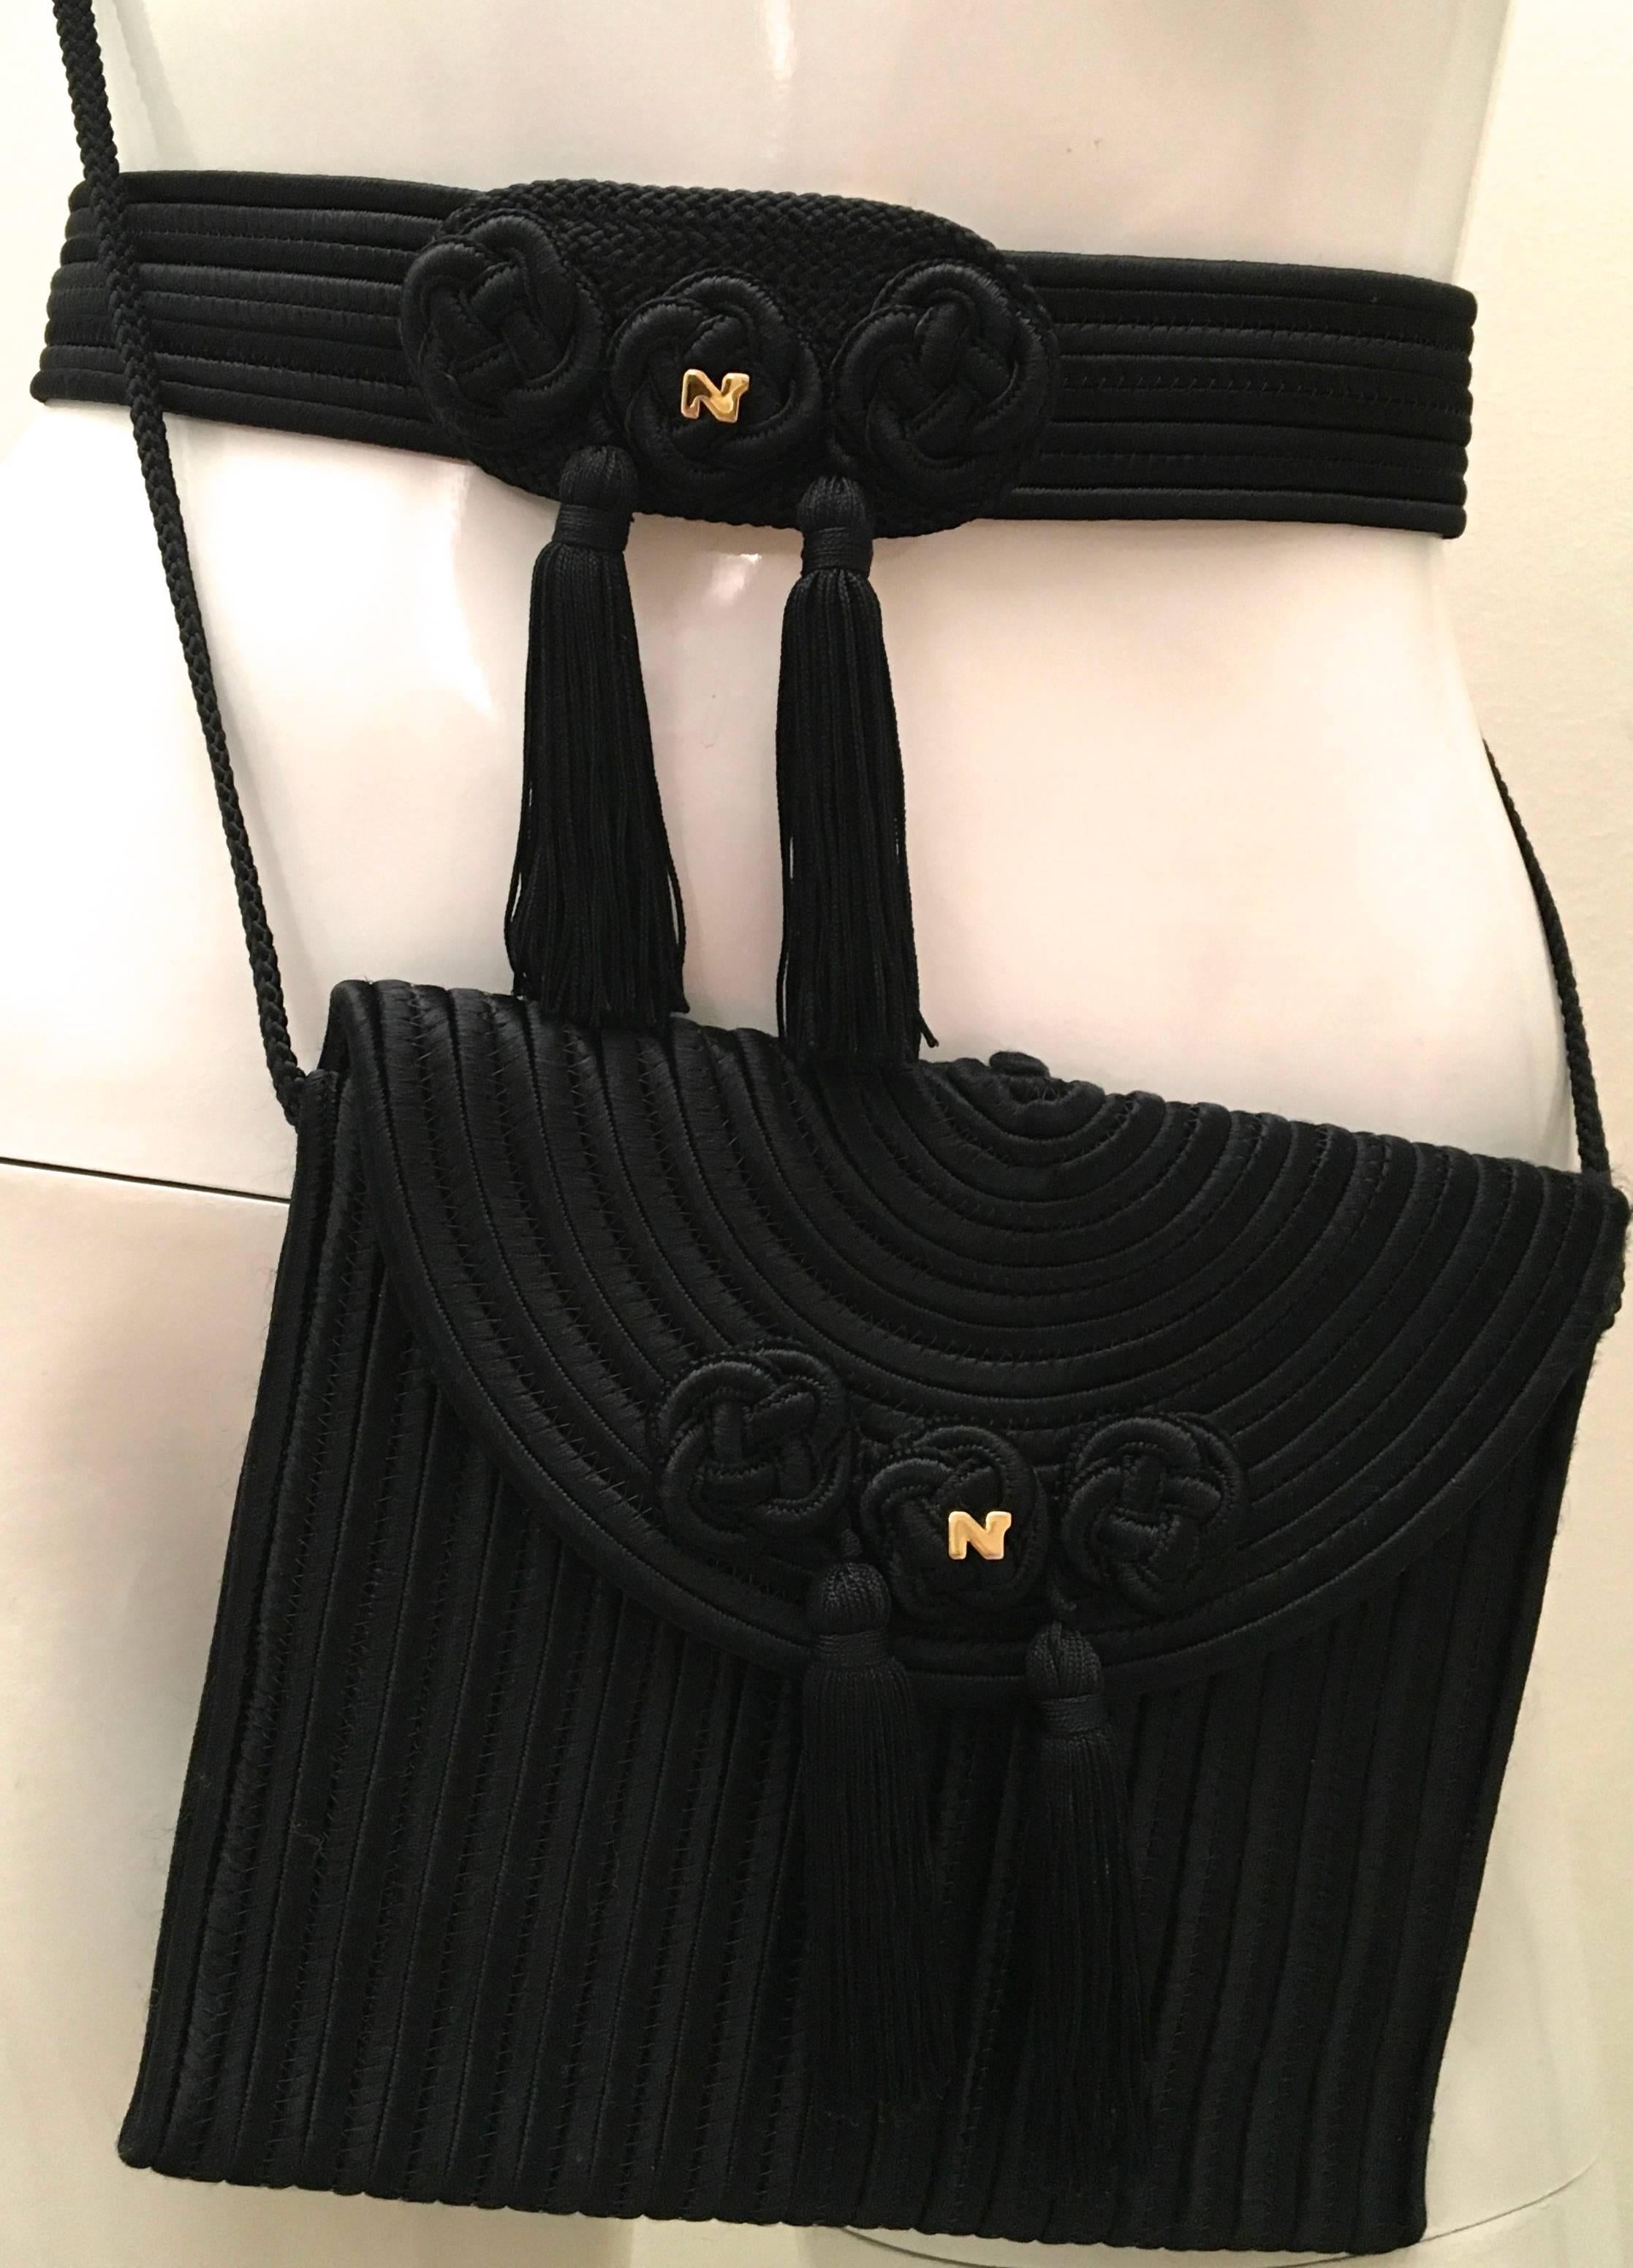 Nina Ricci Purse with Matching Belt - Rare Mint Condition For Sale 4